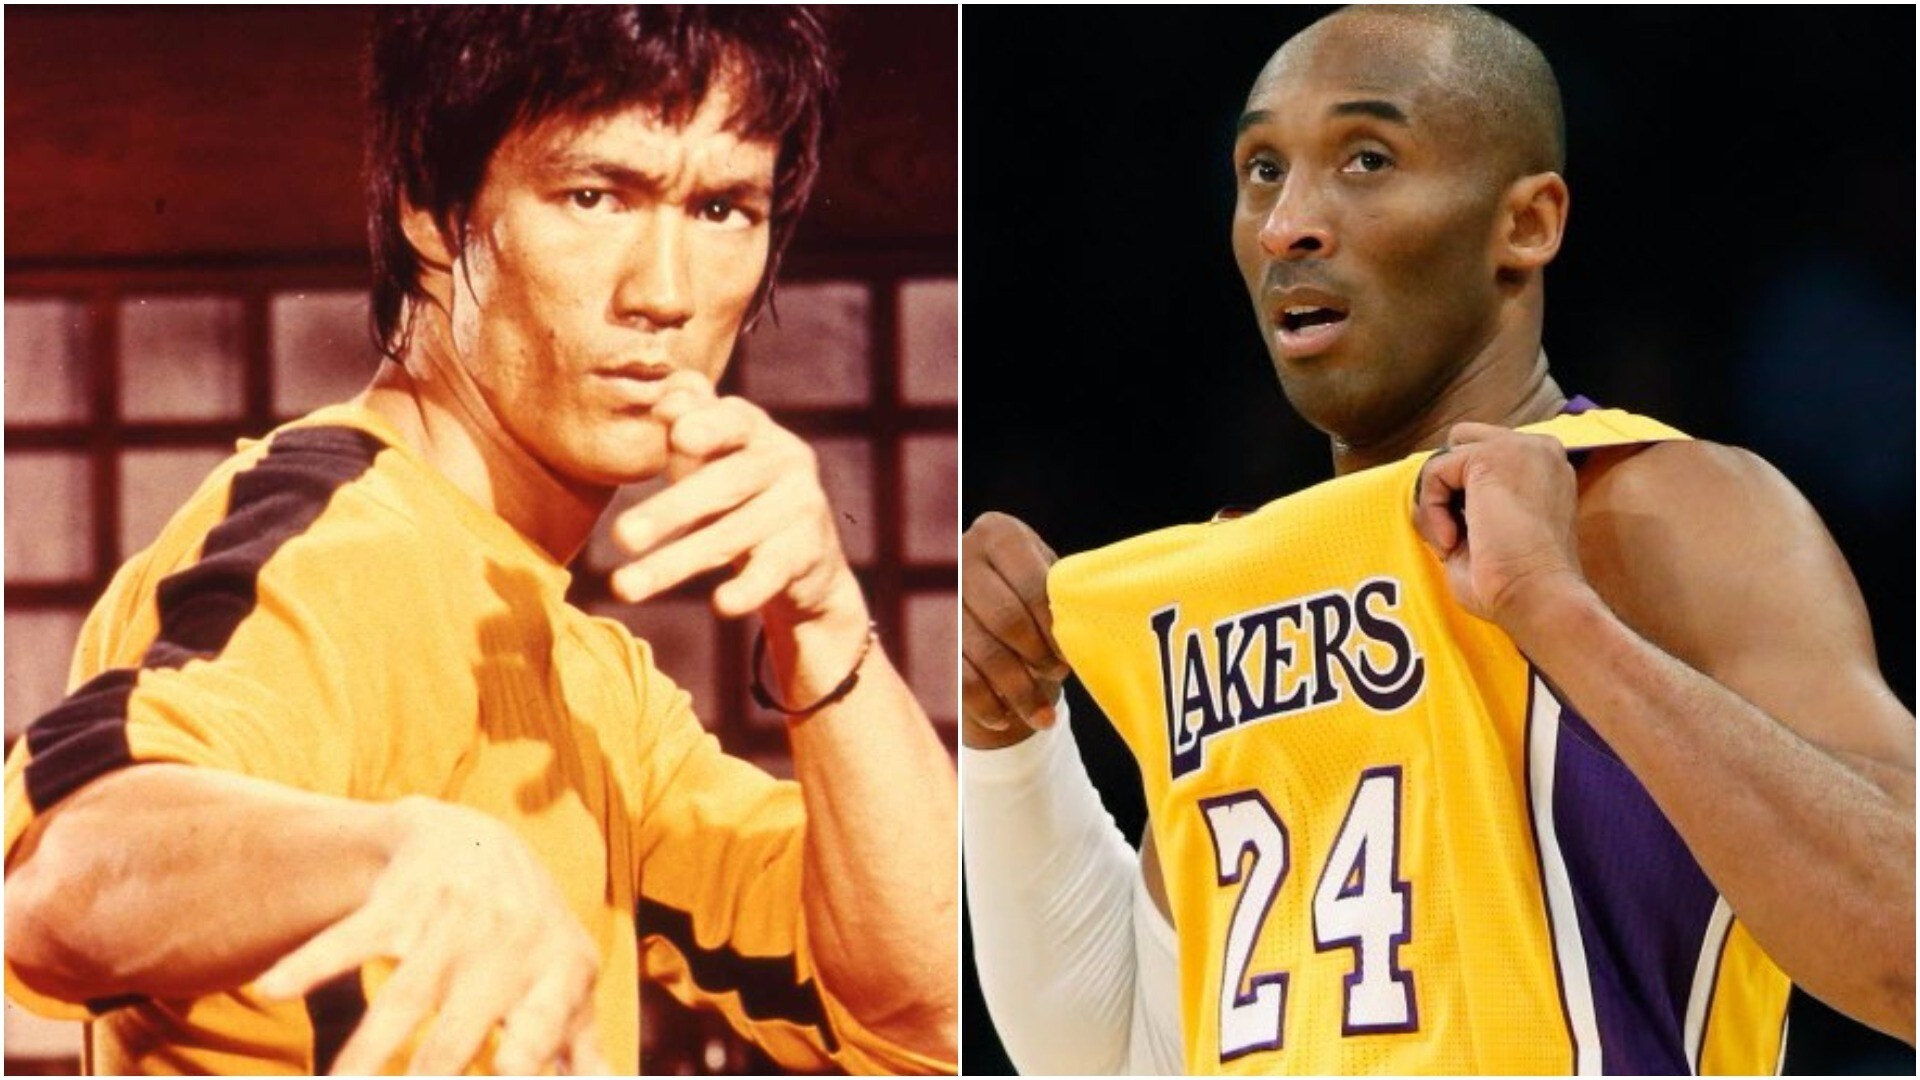 ESPN 30 for 30 'Be Water': how Bruce Lee inspired the NBA, from Kareem Abdul -Jabbar to Kobe Bryant | South China Morning Post